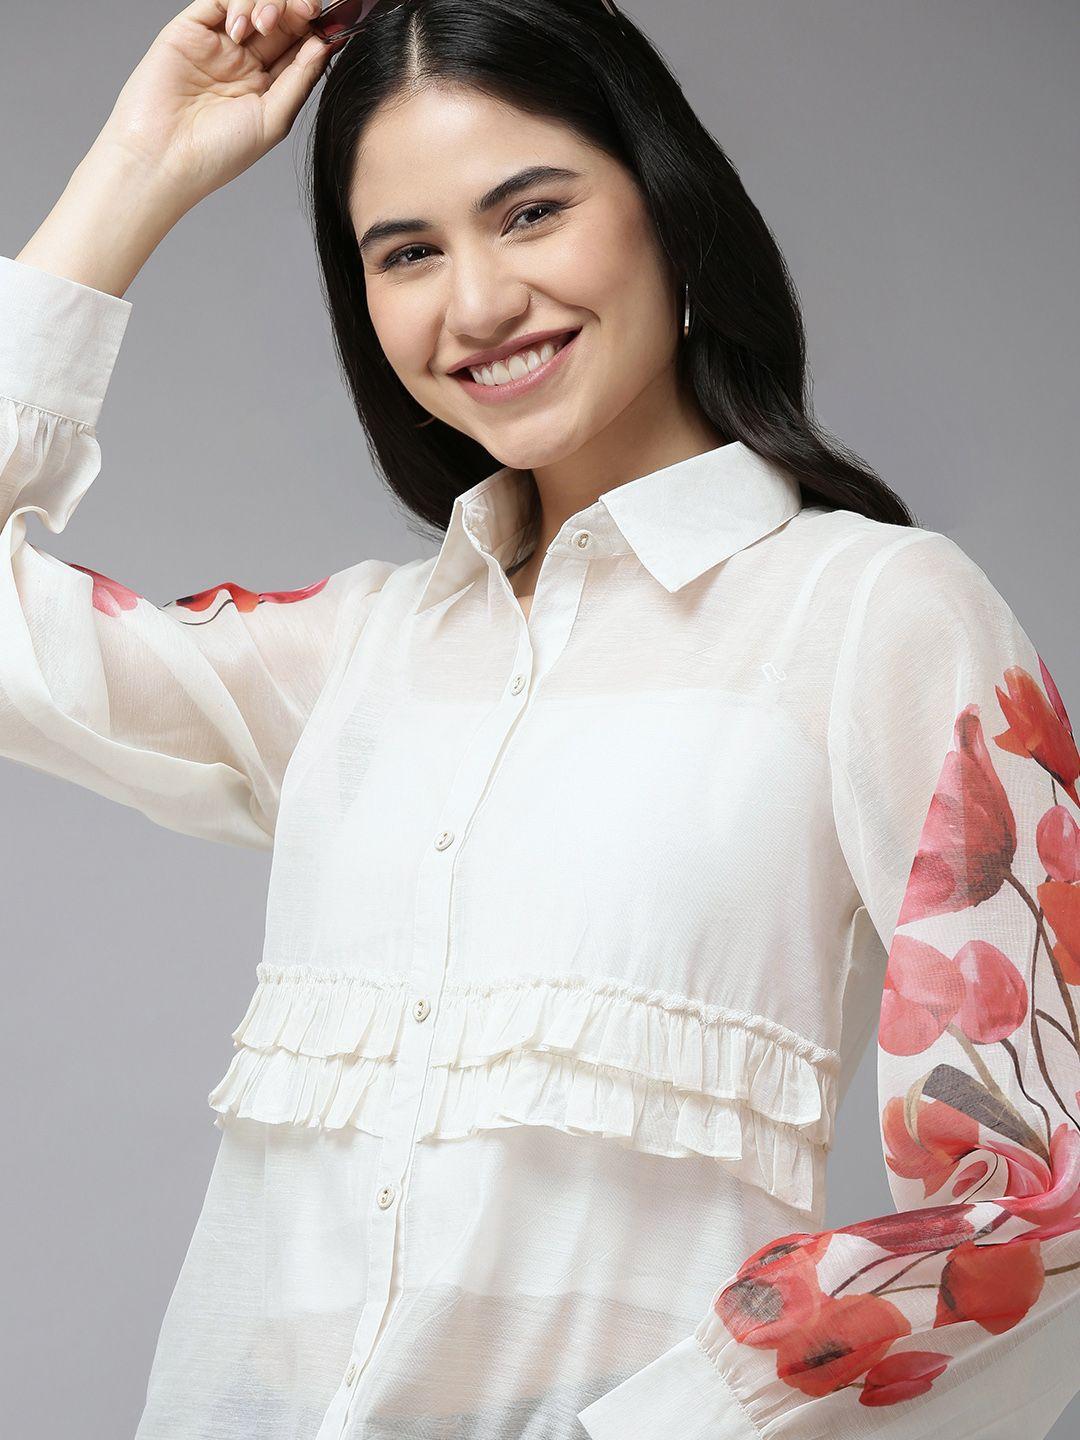 bhama couture women white & red floral detail ruffles shirt style top